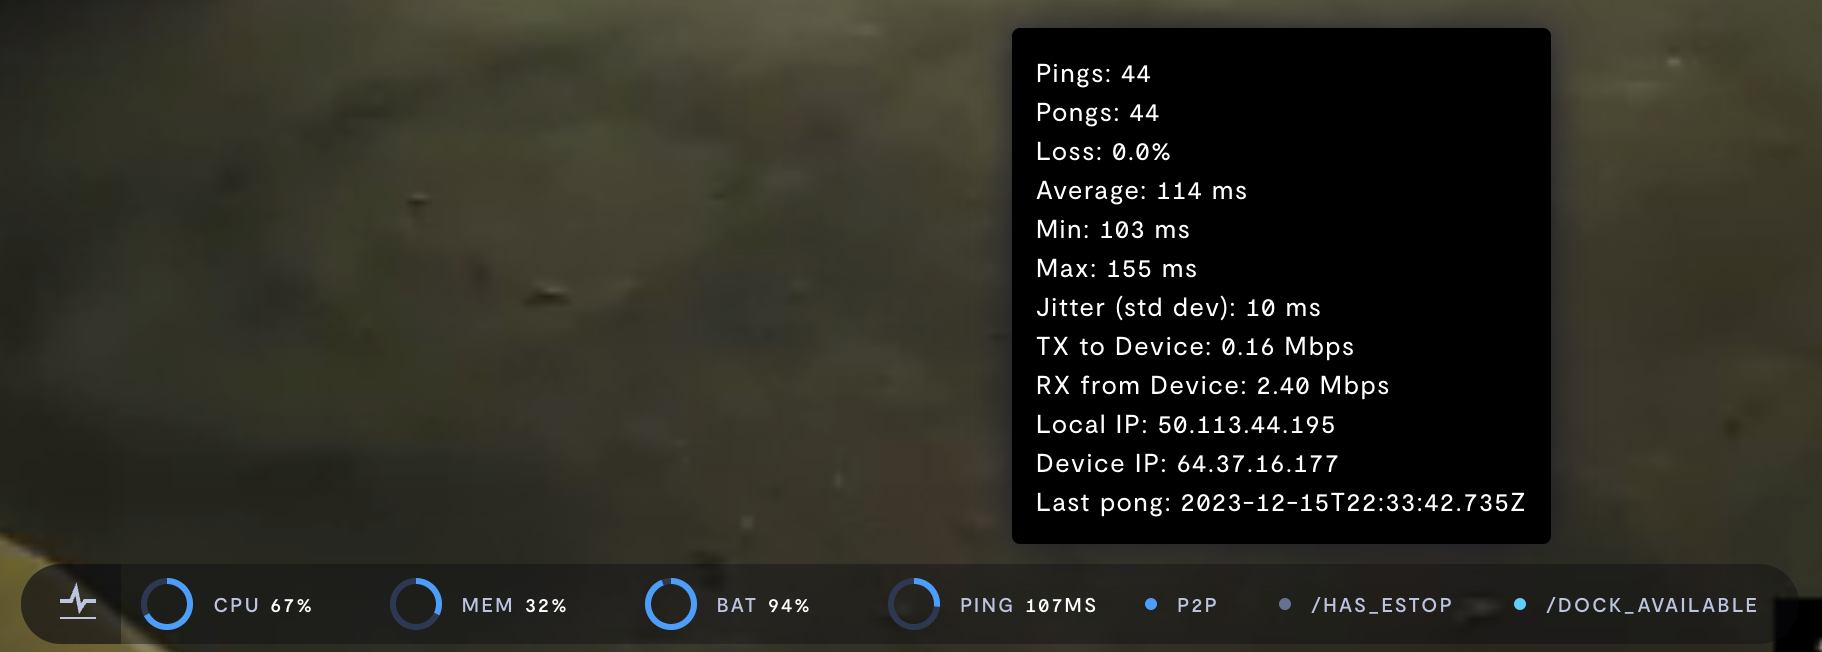 Hovering over the ping indicator